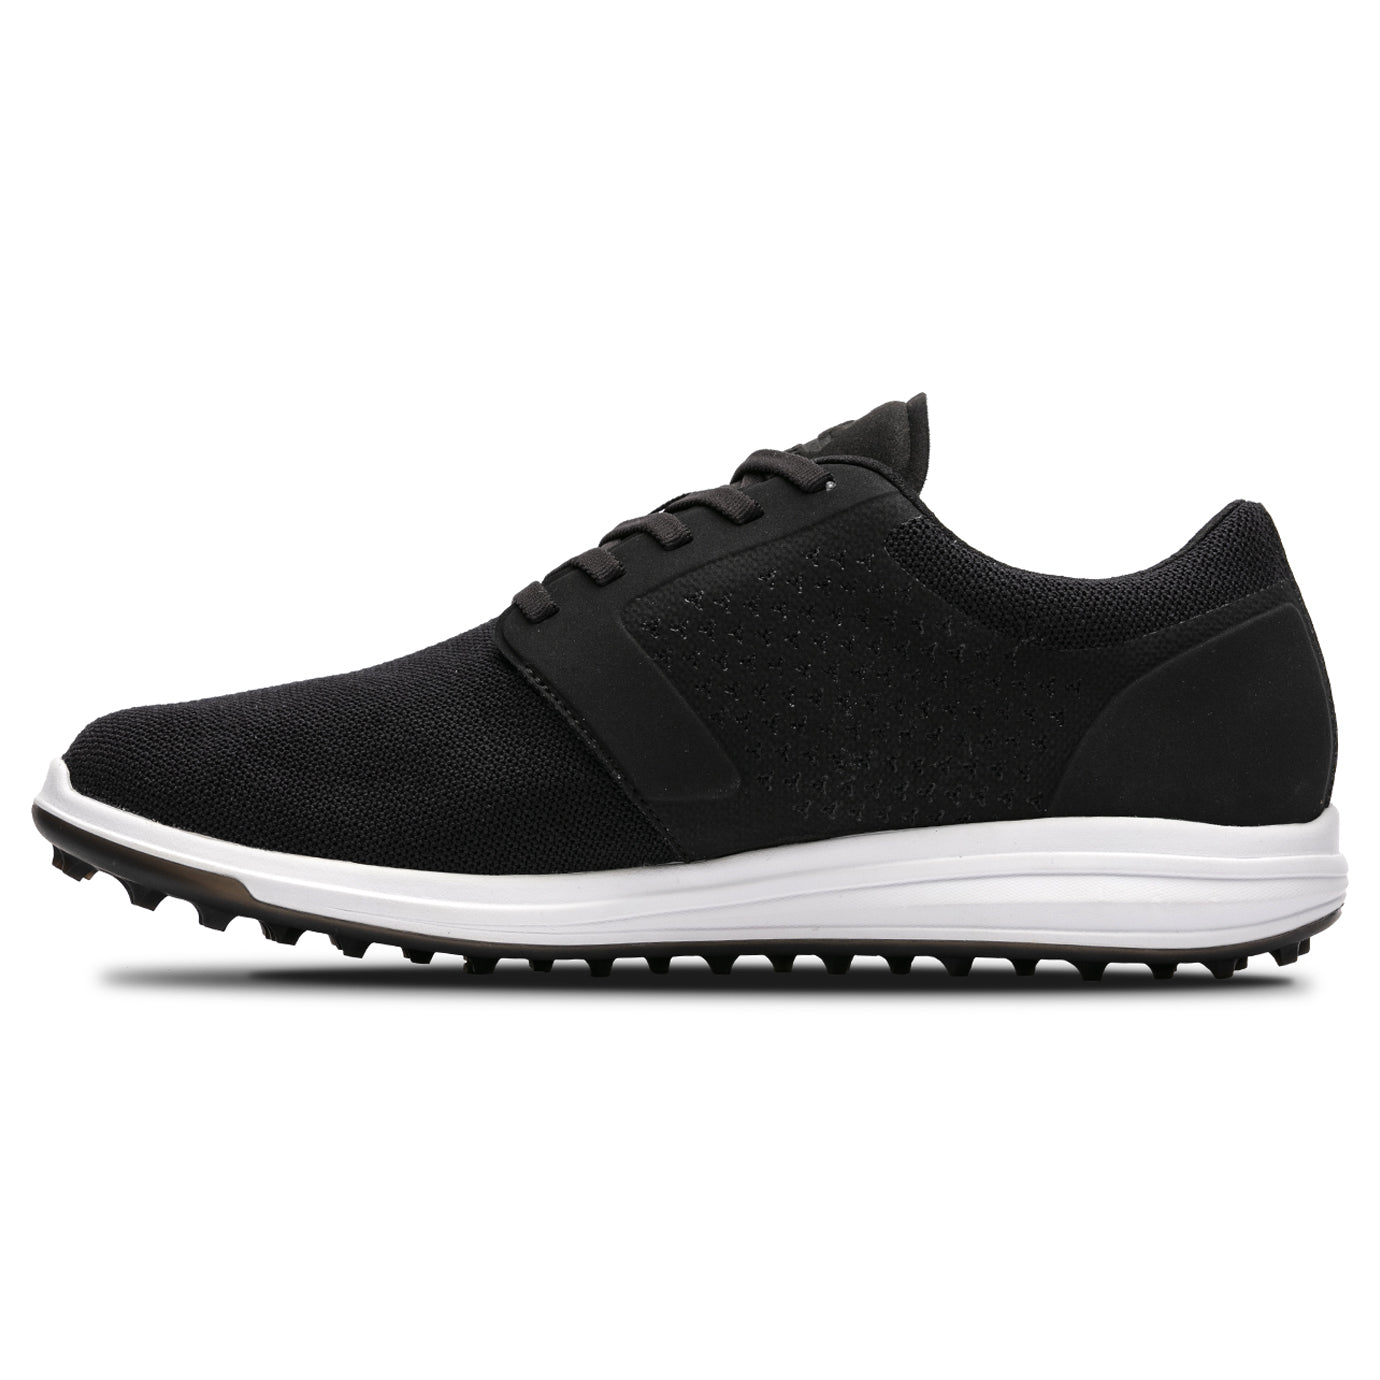 Cuater The Money Maker Golf Shoes 4MR216 Black | Function18 | Restrictedgs